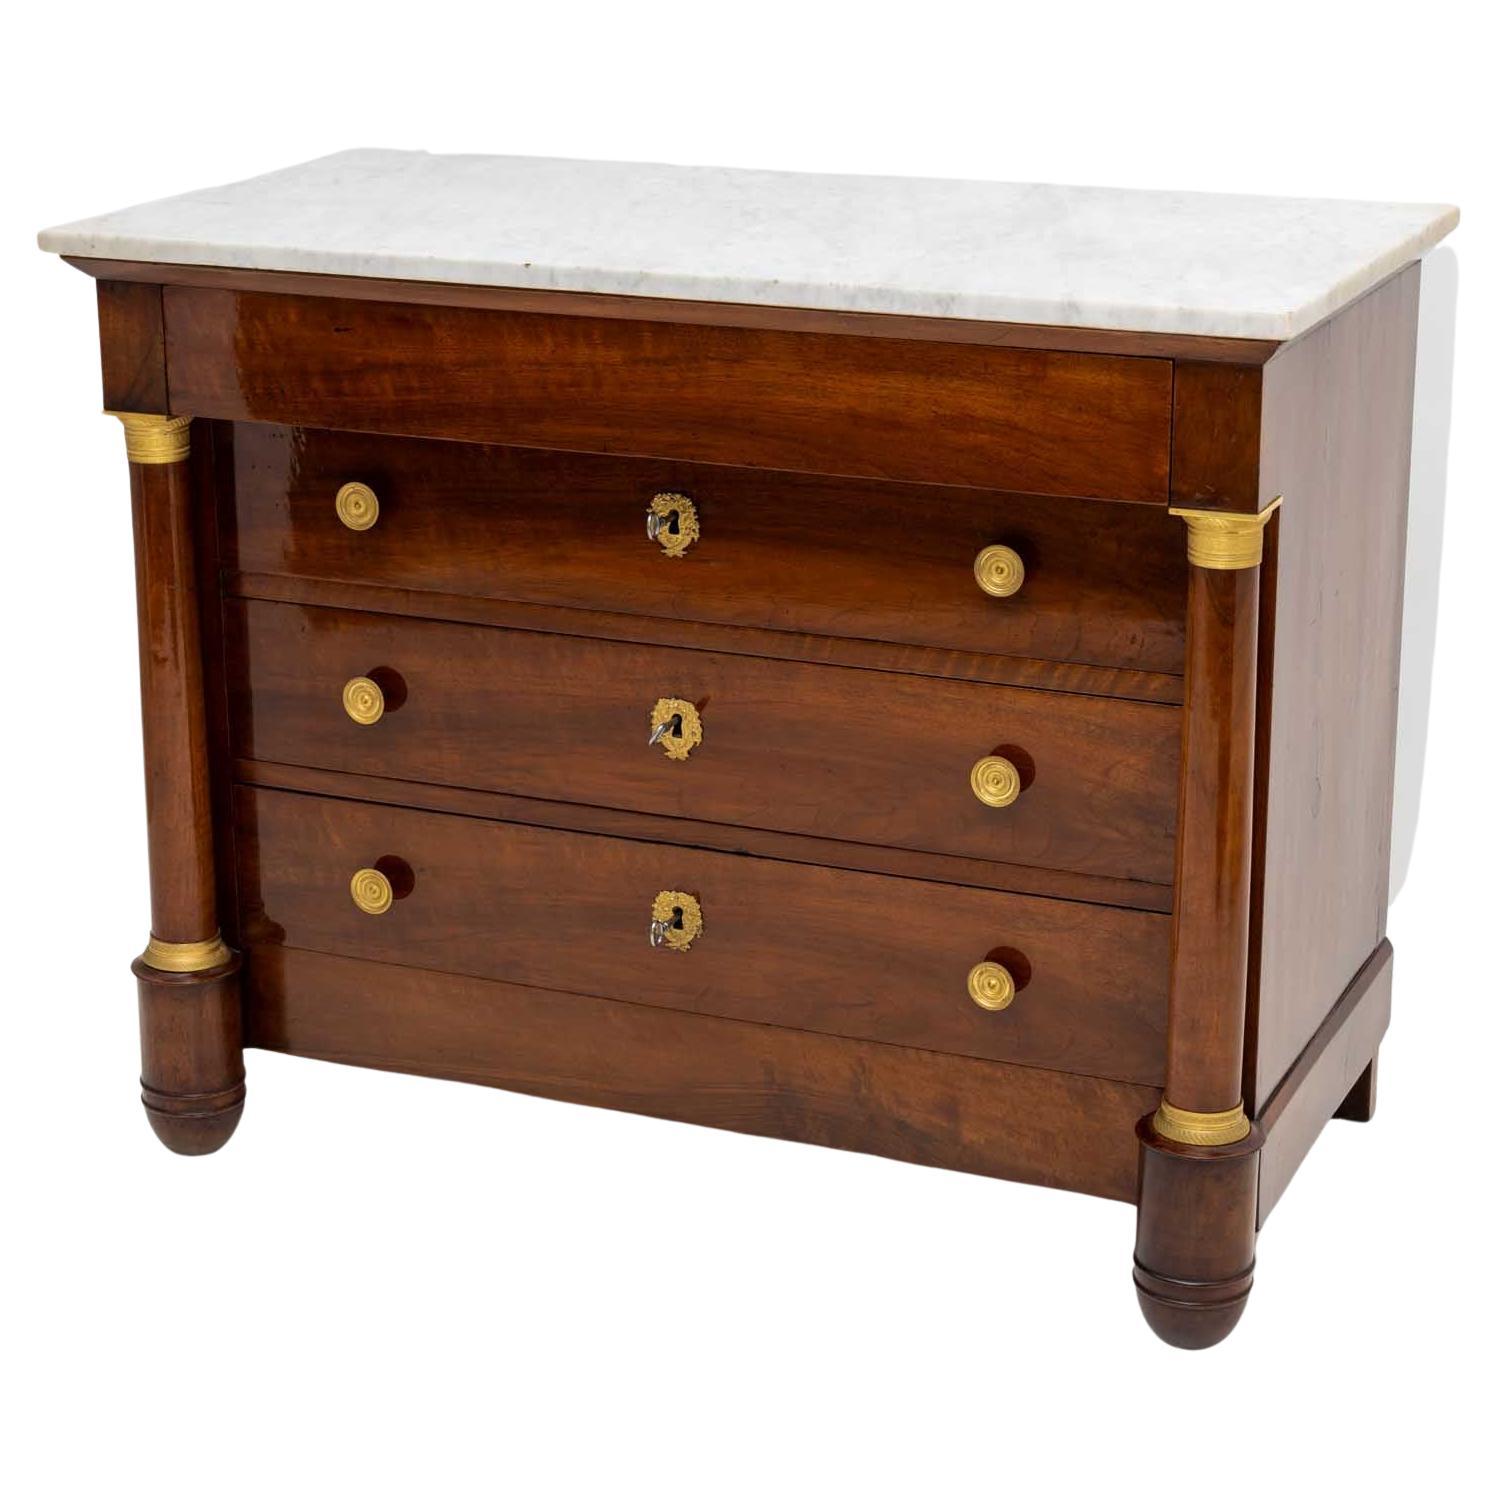 Empire Chest of Drawers with White Marble Top, France Early 19th Century For Sale